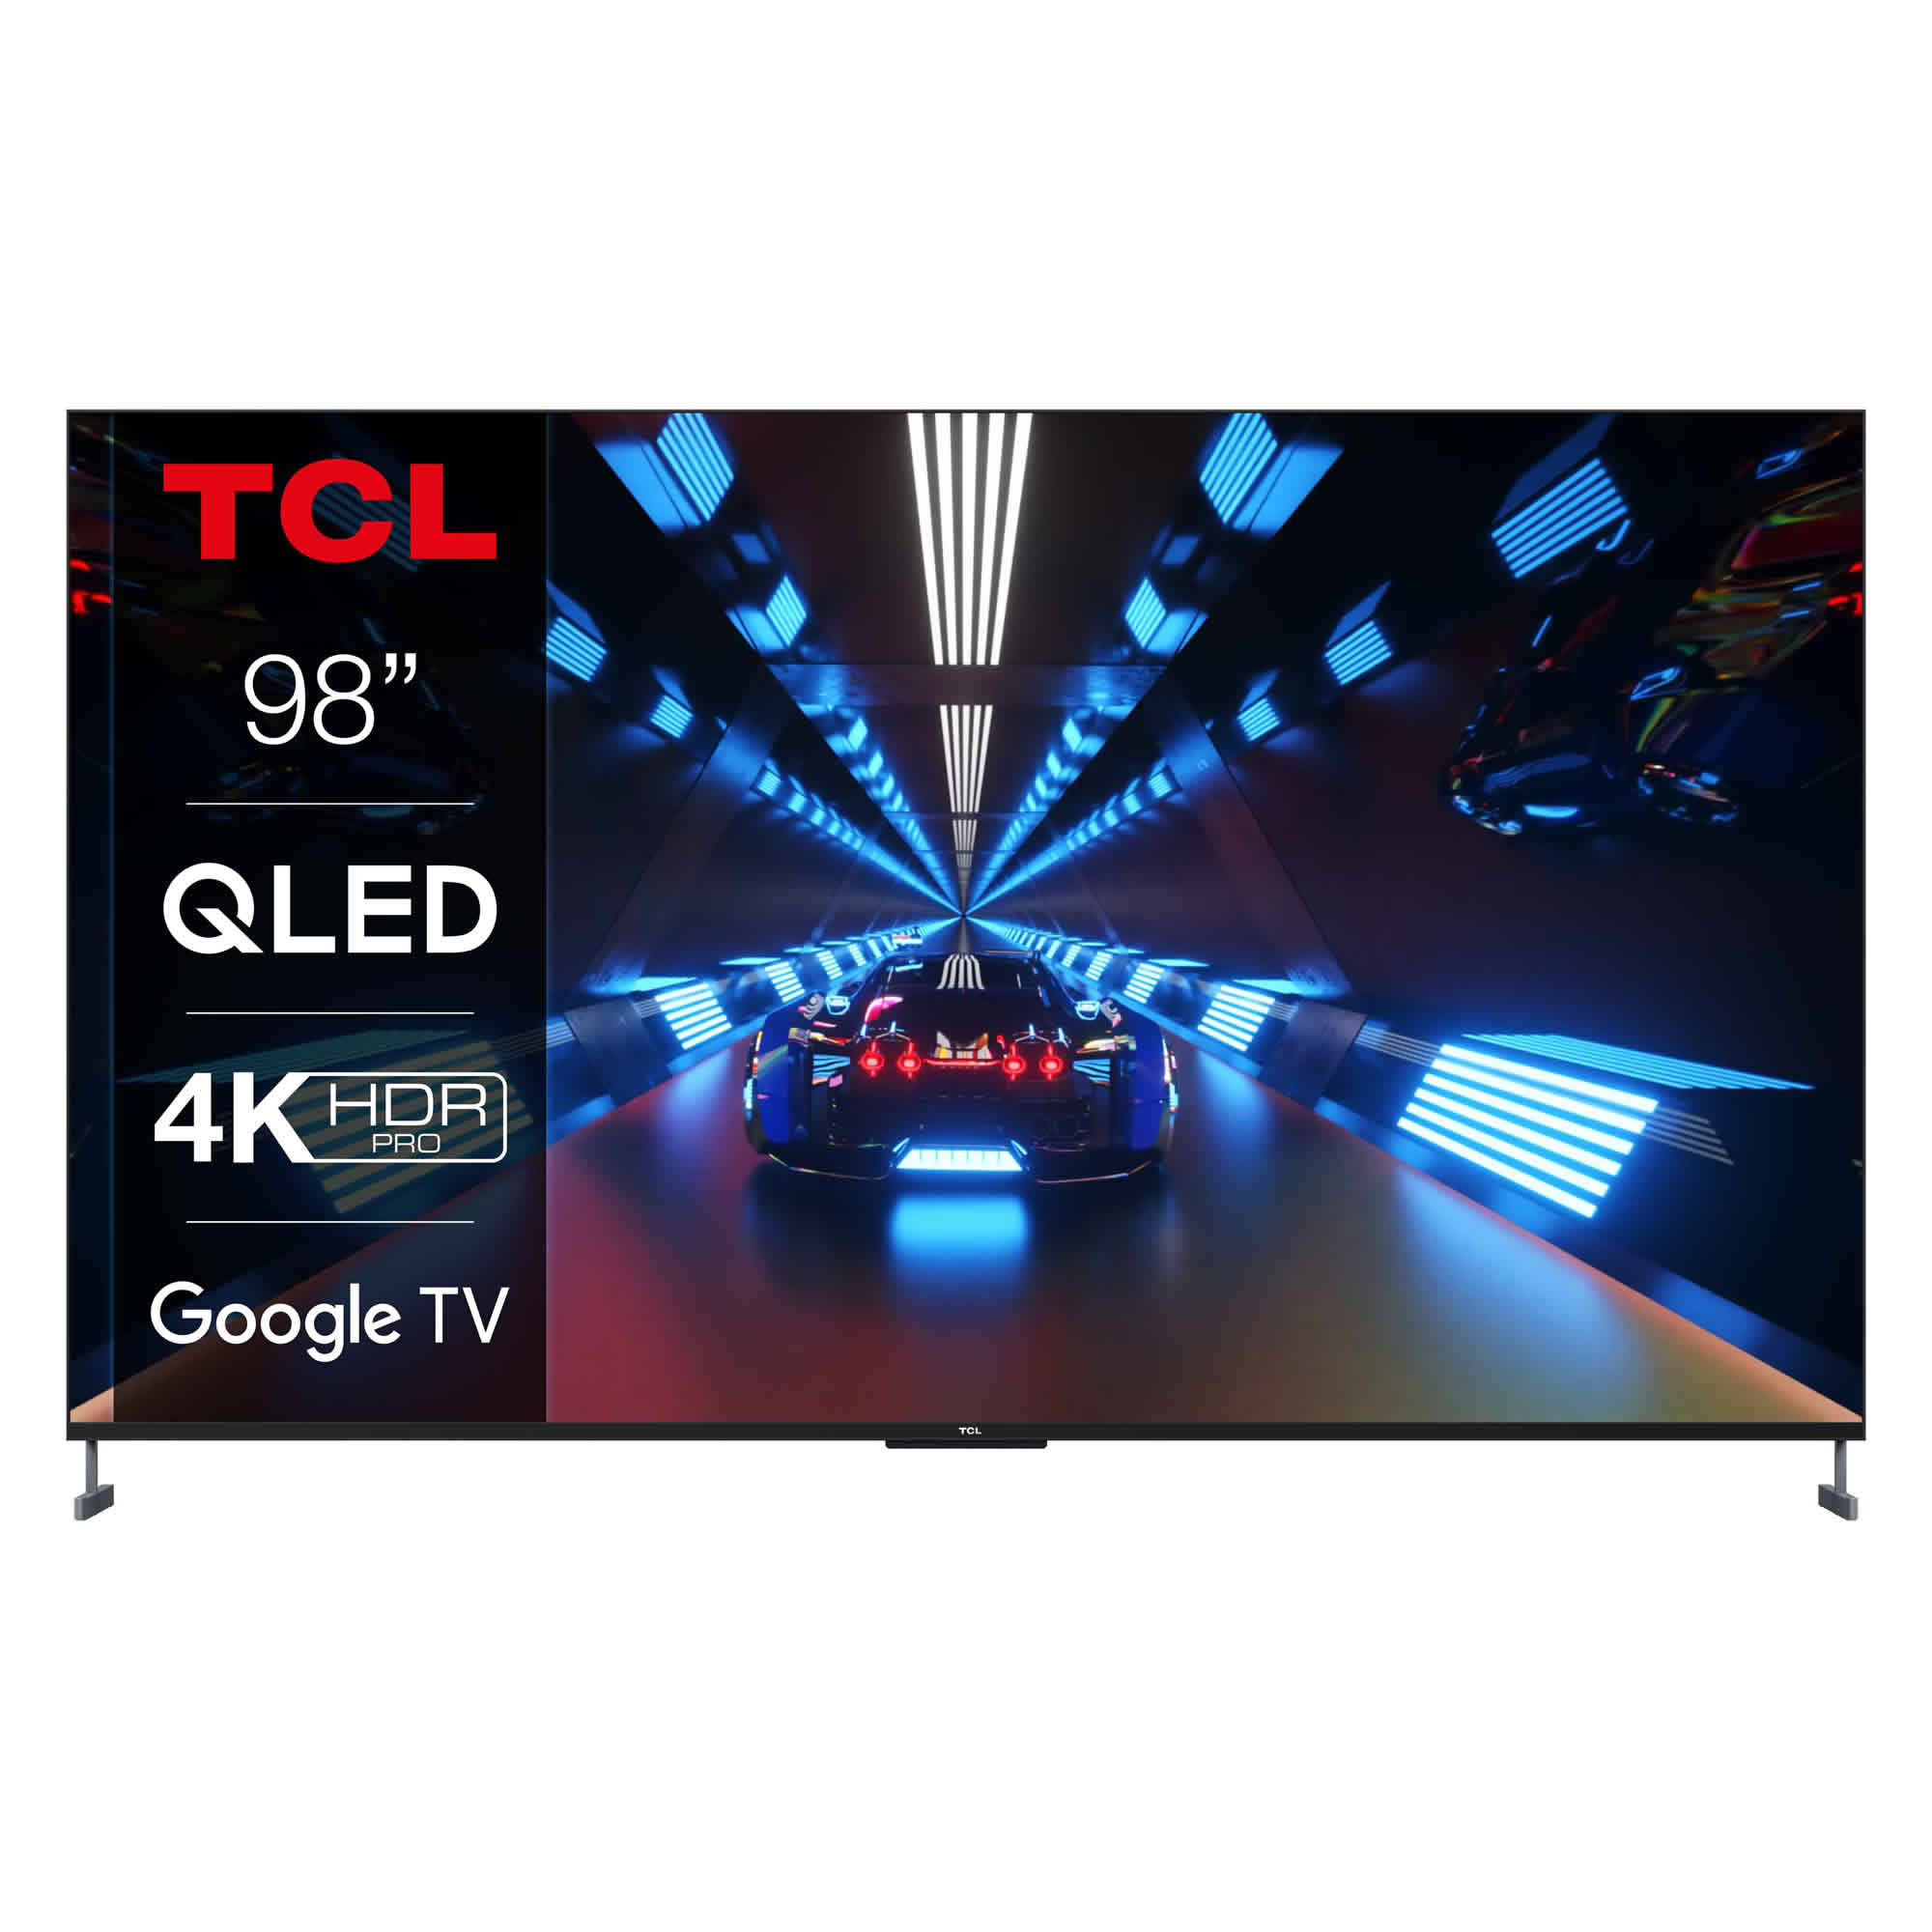 TCL 98inch 4K QLED SMART TV WiFi Freeview HD Google